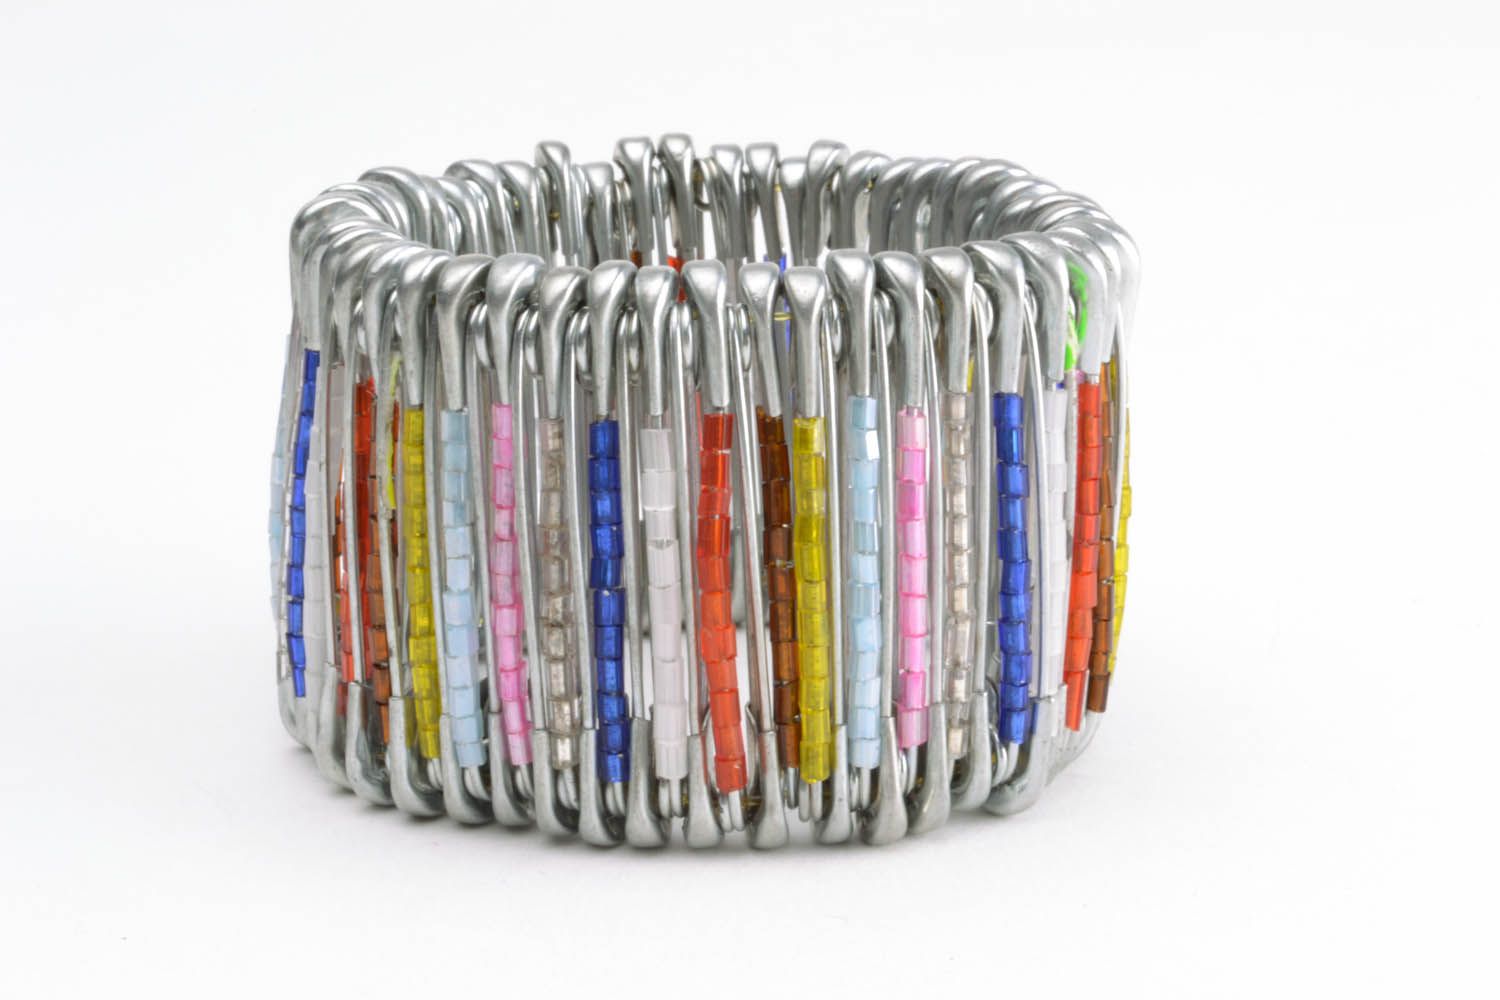 Bracelet made of pins and beads photo 3